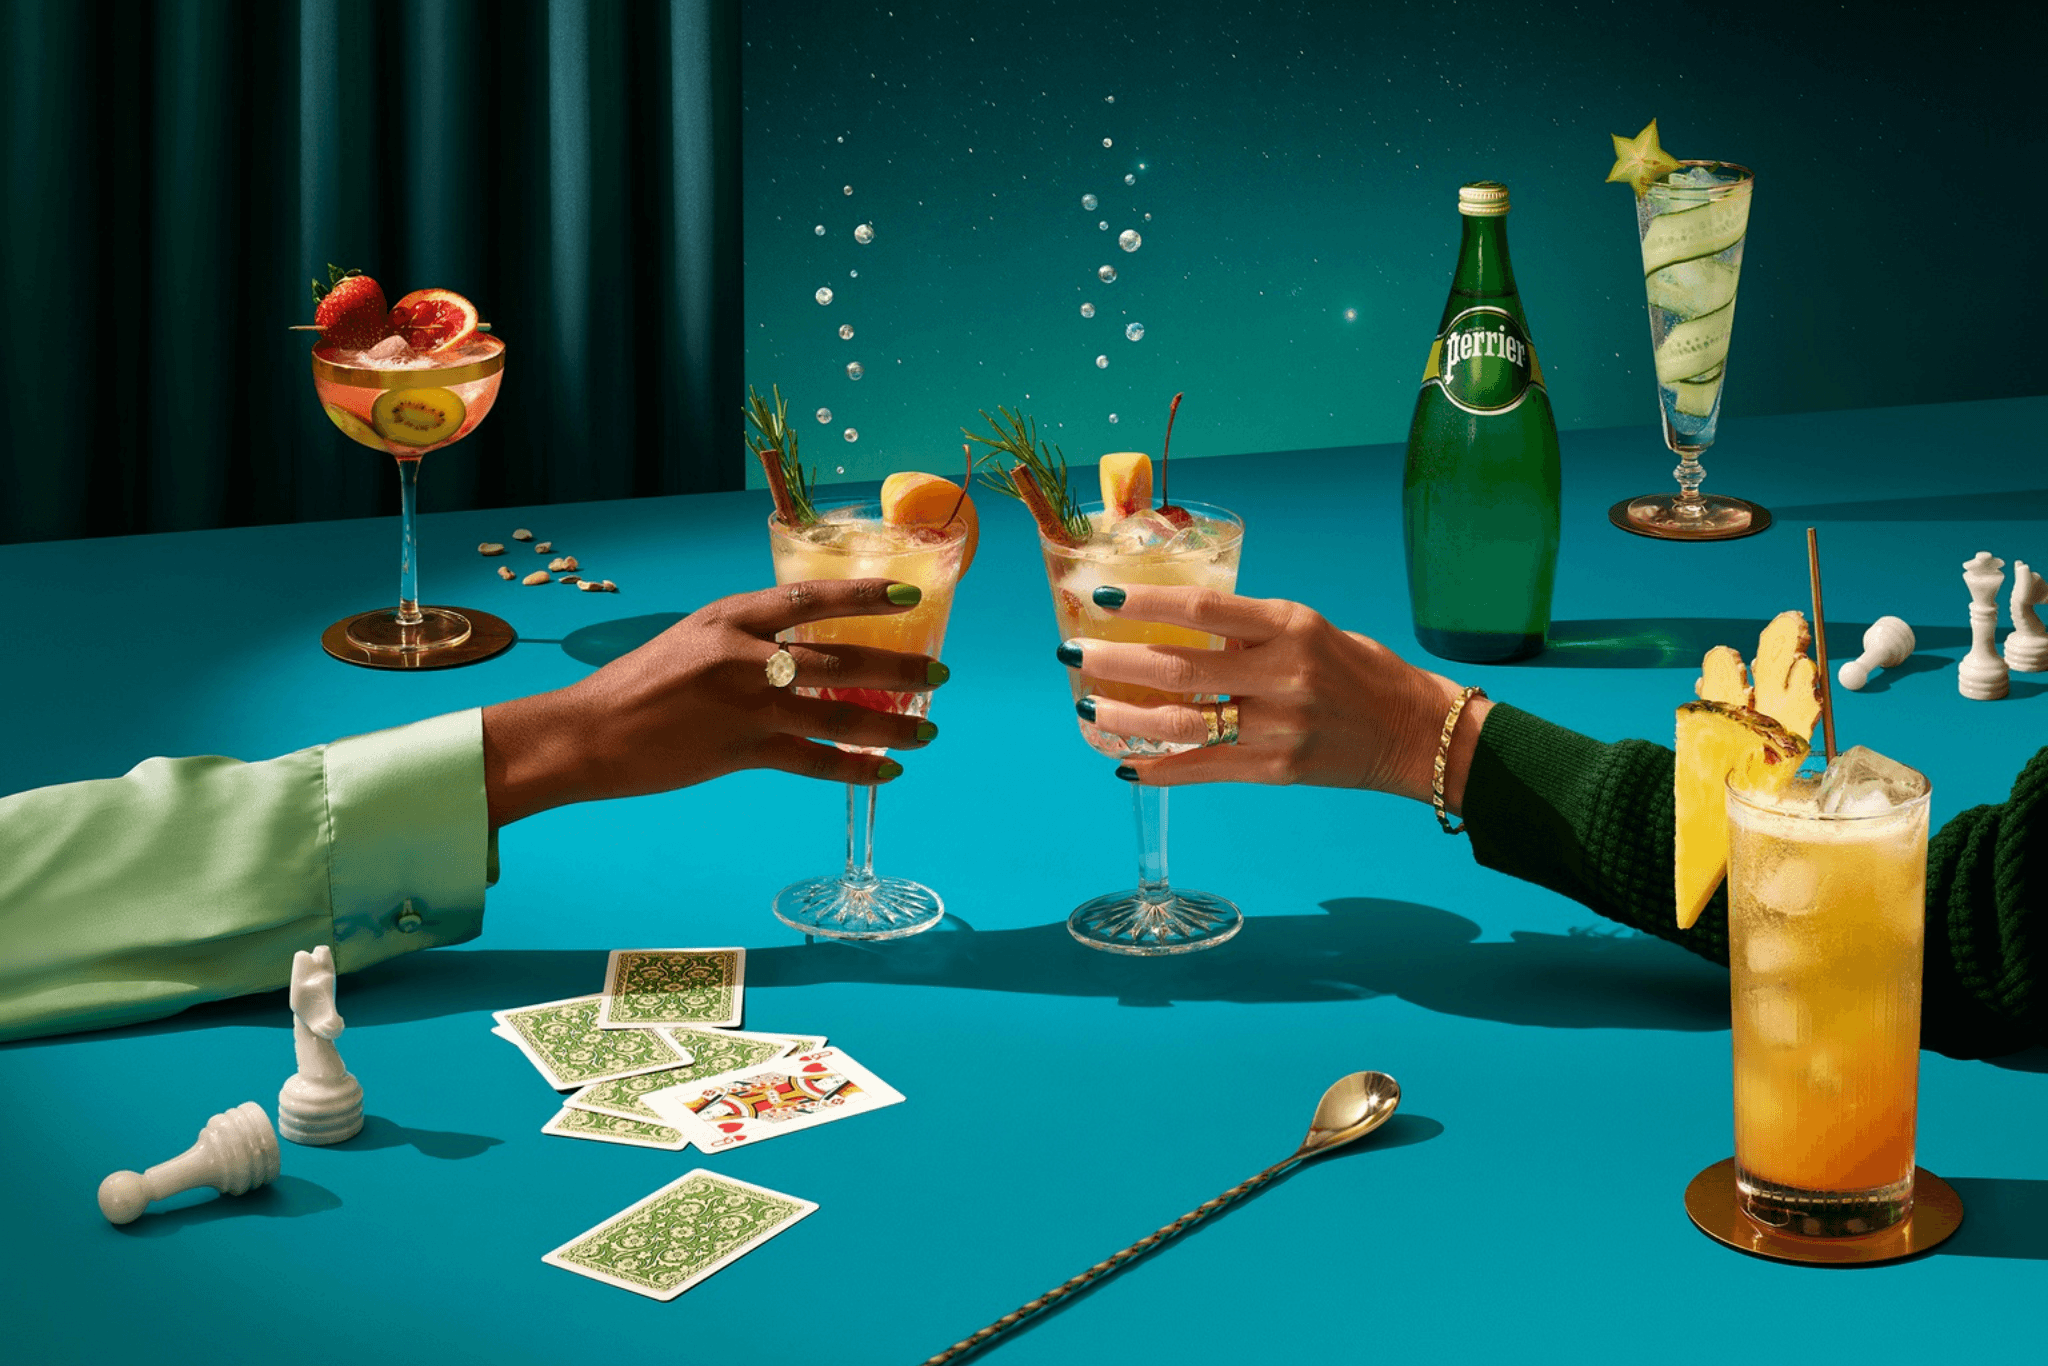 Arms of two people toasting with cocktails over a card game table.